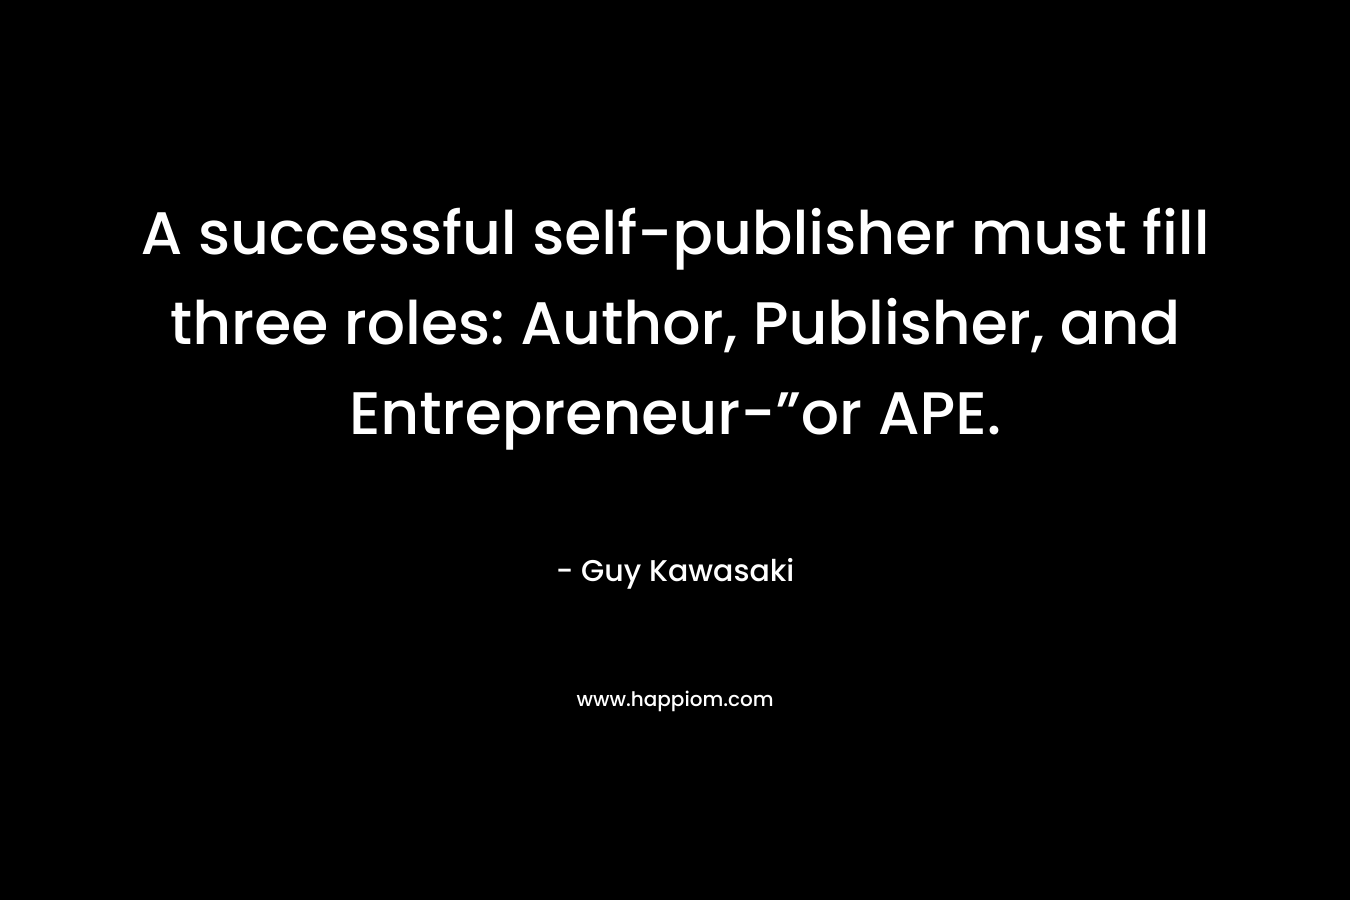 A successful self-publisher must fill three roles: Author, Publisher, and Entrepreneur-”or APE.